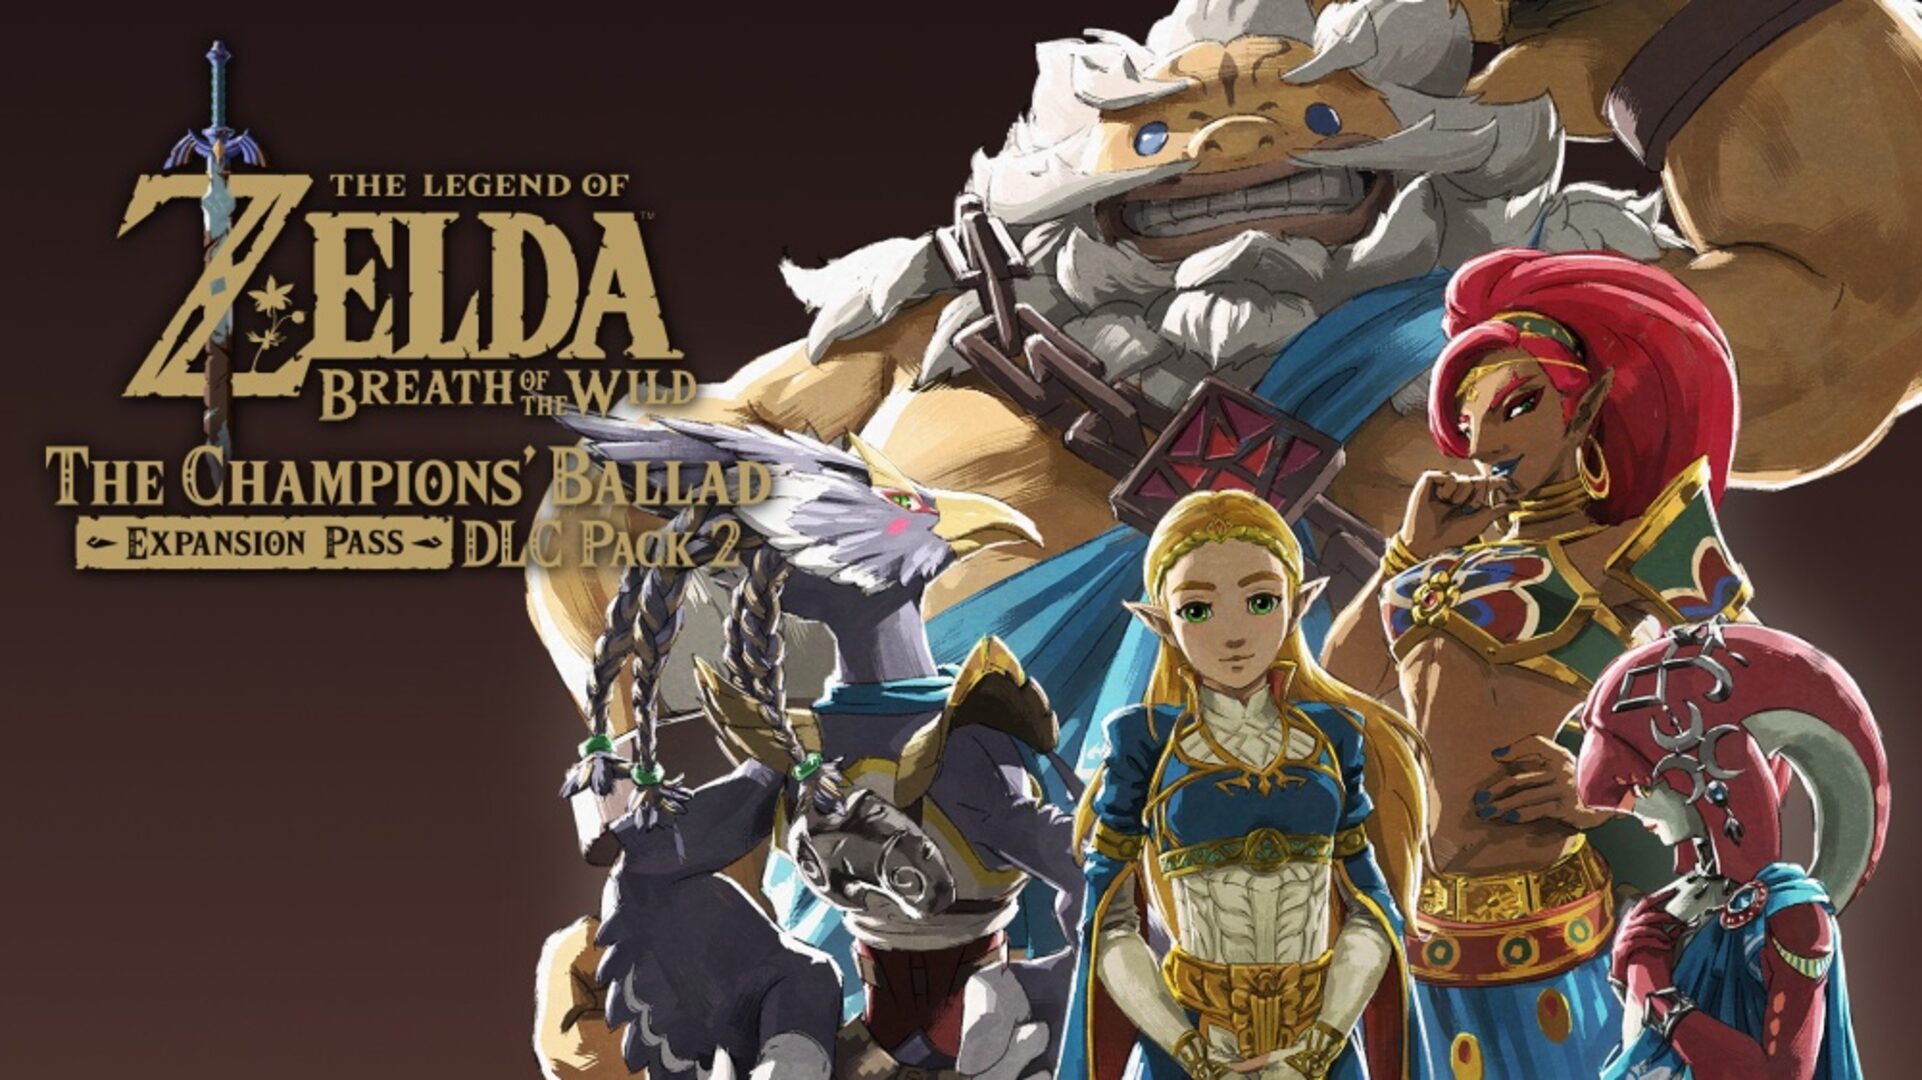 The Legend of Zelda: Breath of the Wild Expansion Pass for Nintendo Switch  - Nintendo Official Site